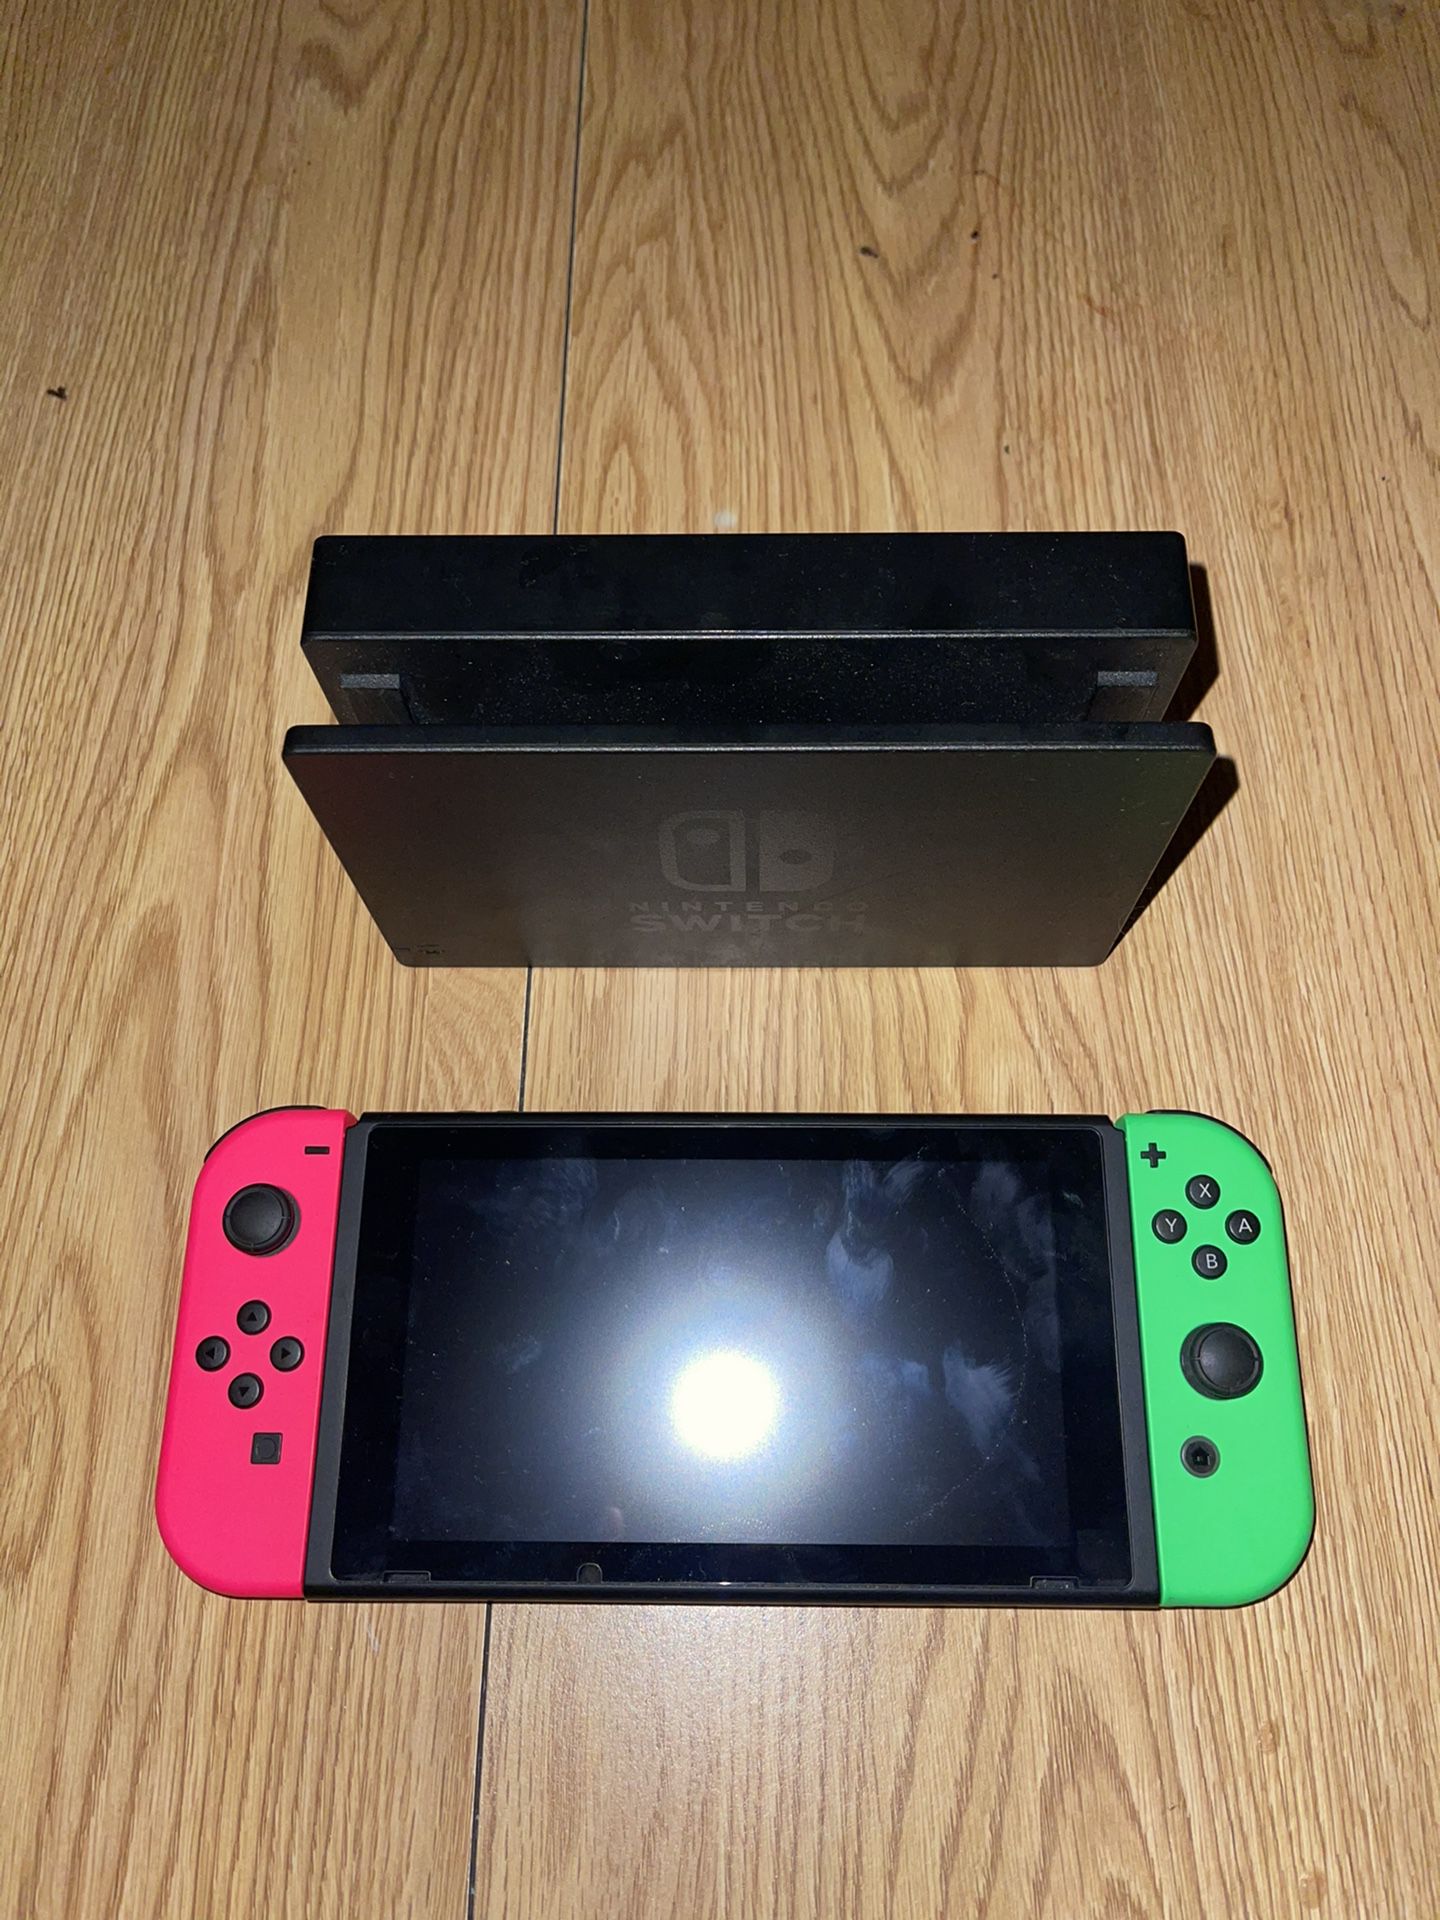 Nintendo Switch For Trade For Retro Games And Trading Cards 